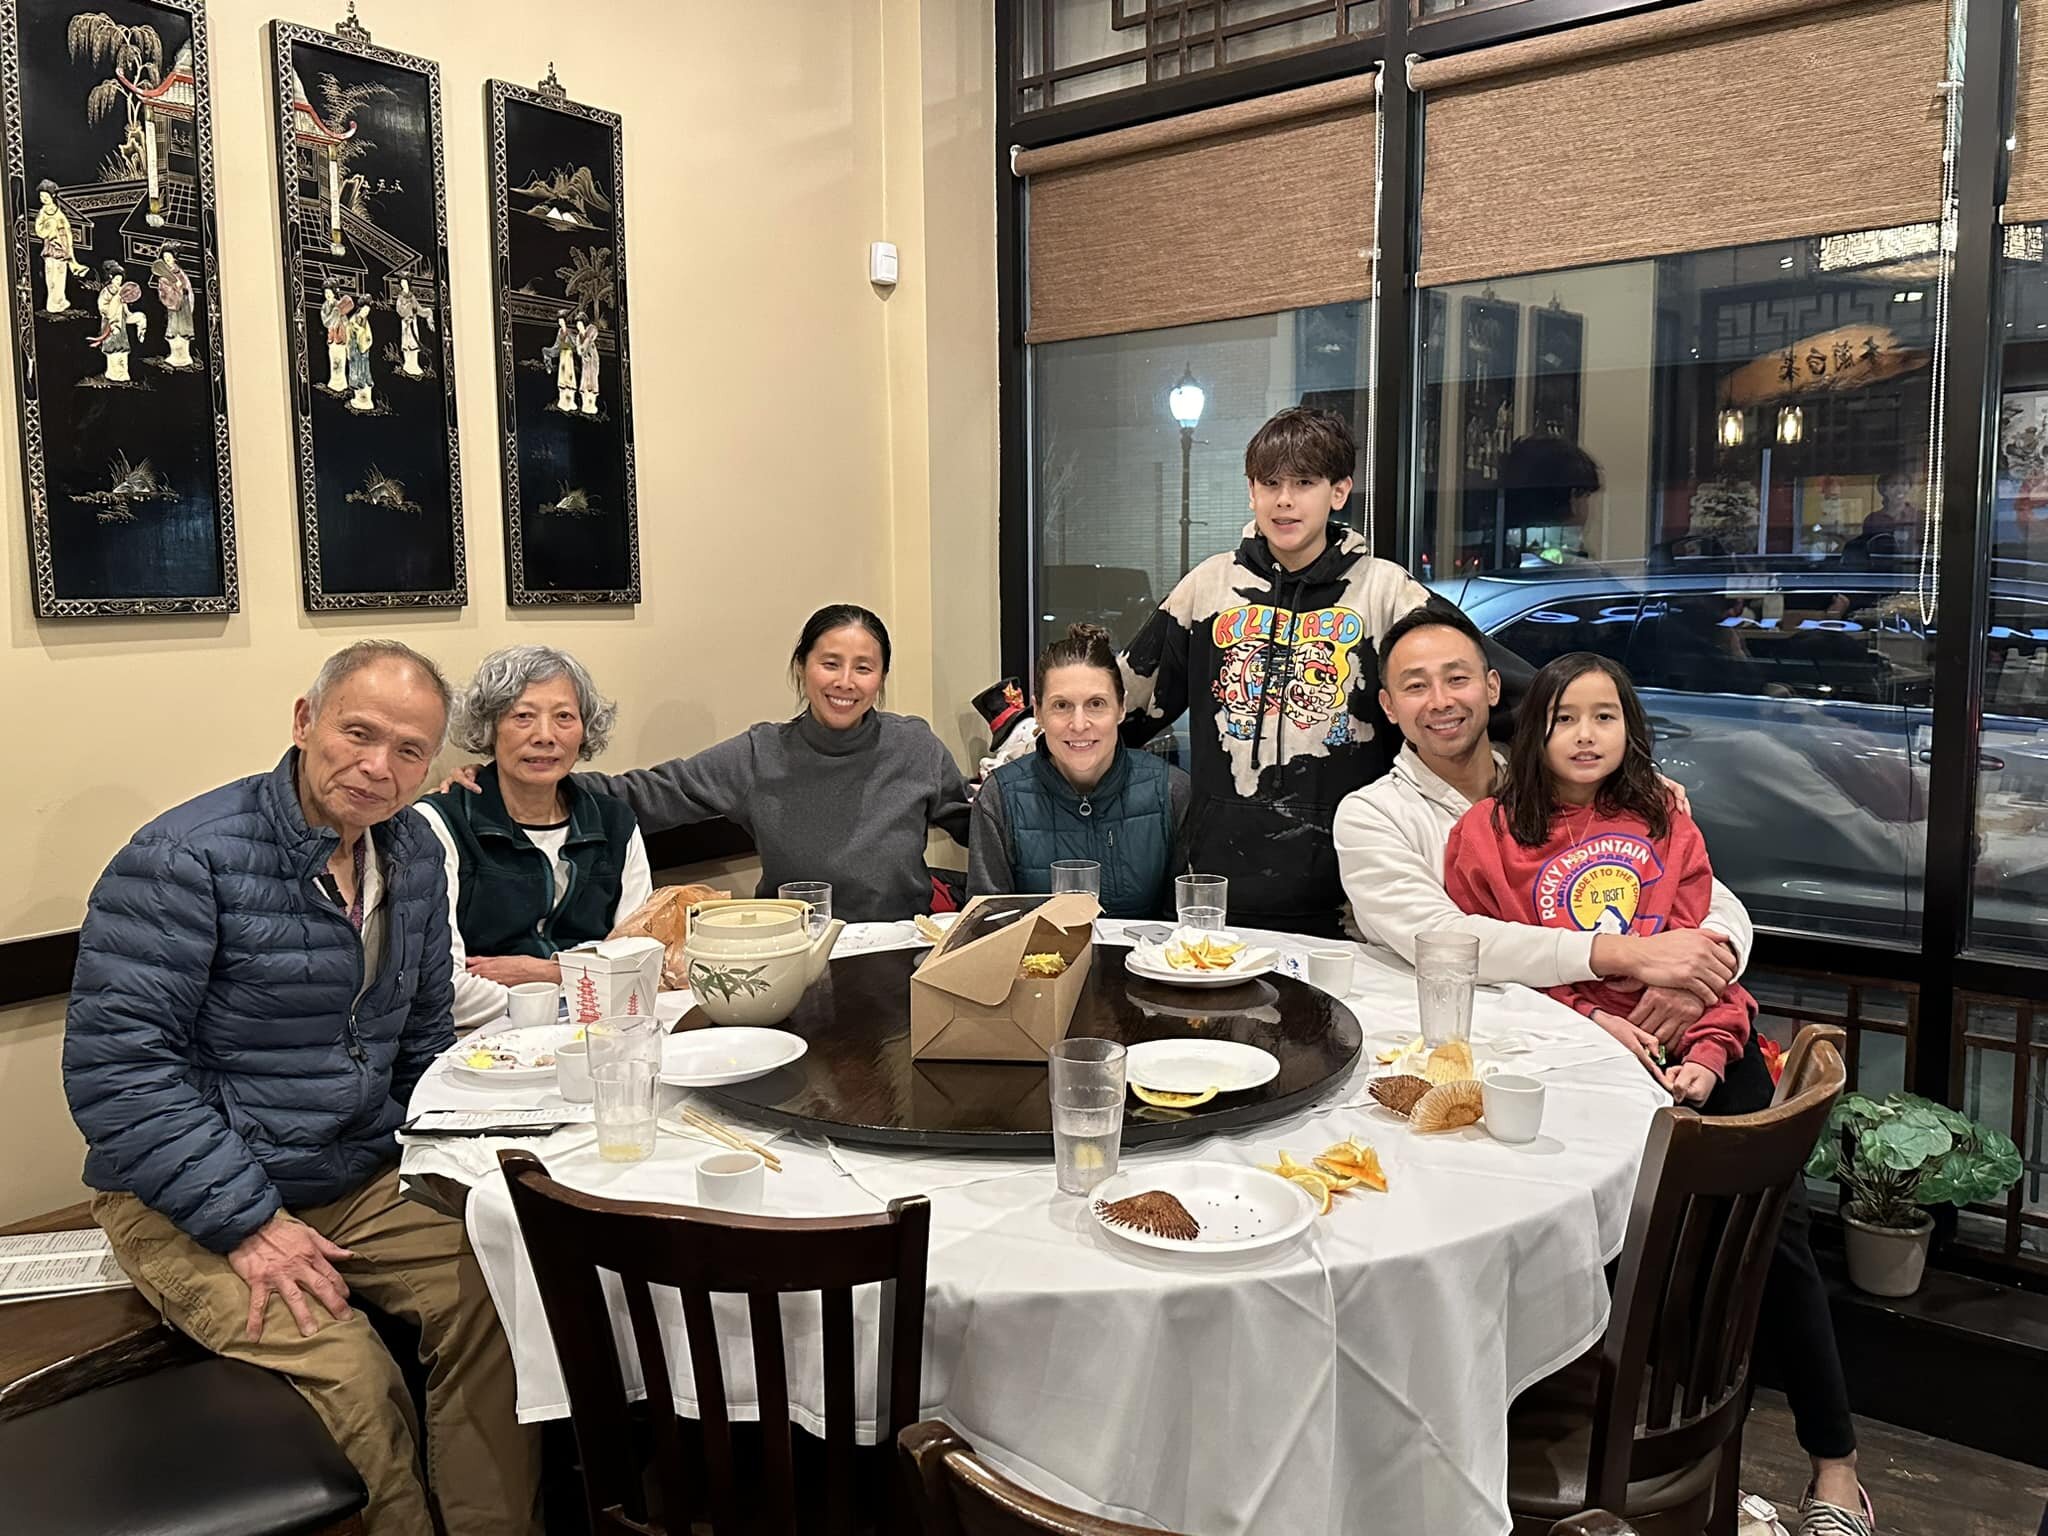 Enjoy an amazing Taiwanese Family Meal for my 45th Birthday!